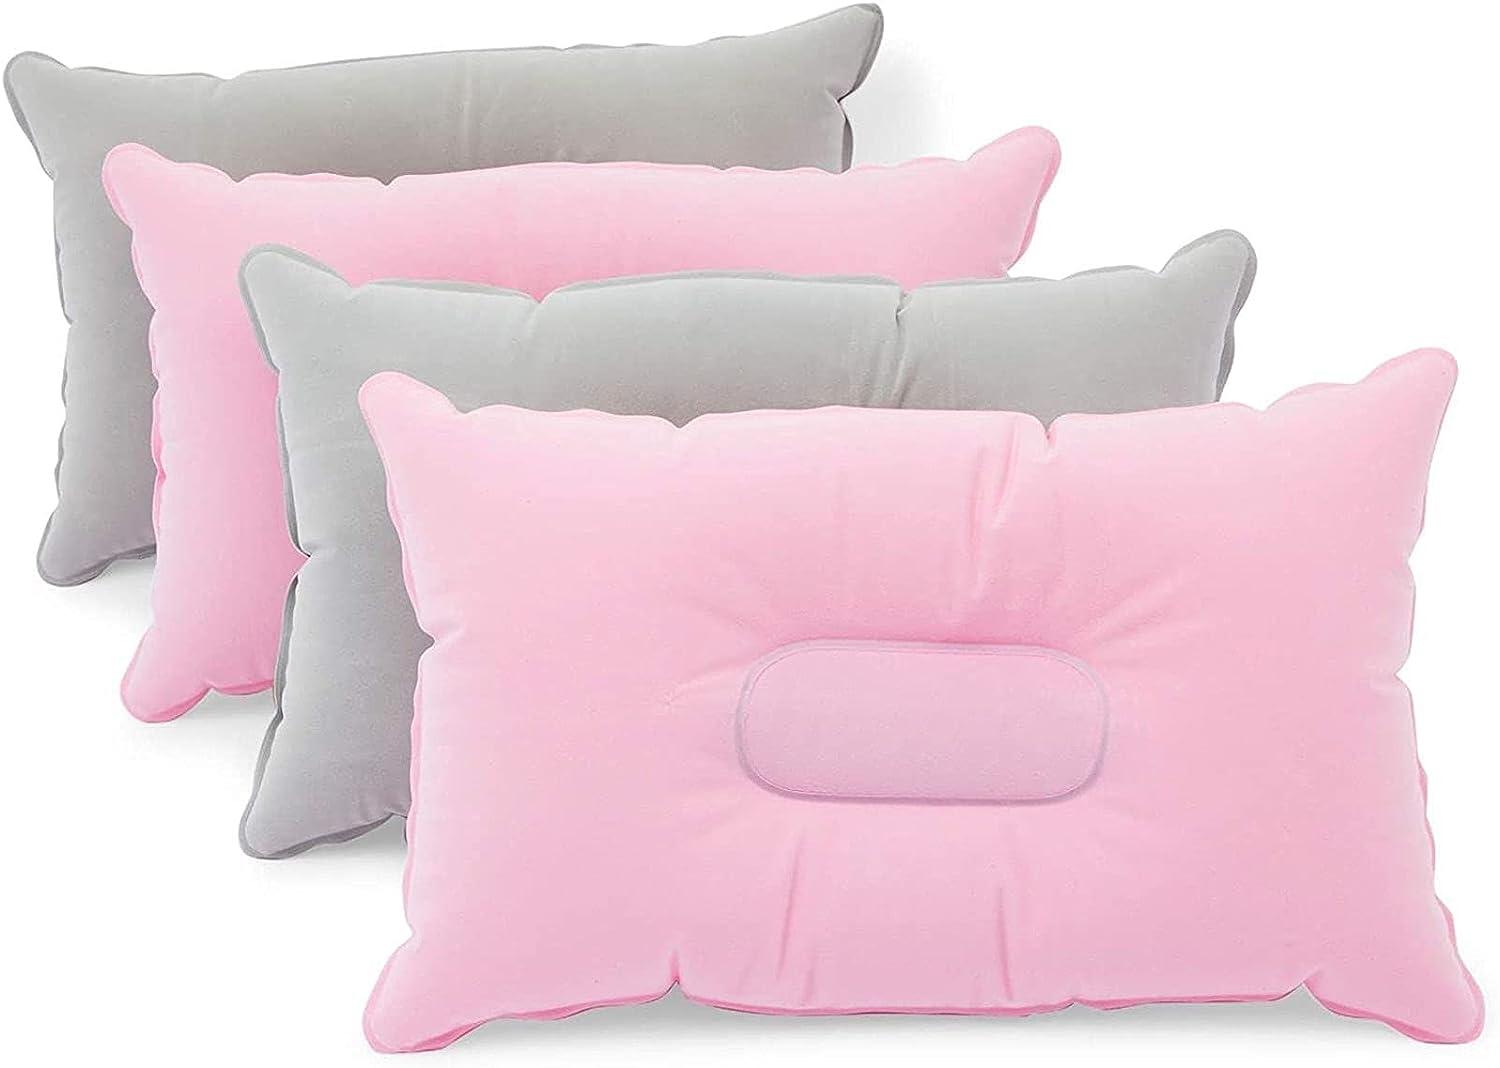 Inflatable Travel Pillows for Camping and Traveling (Pink, Grey, 4 Pack)